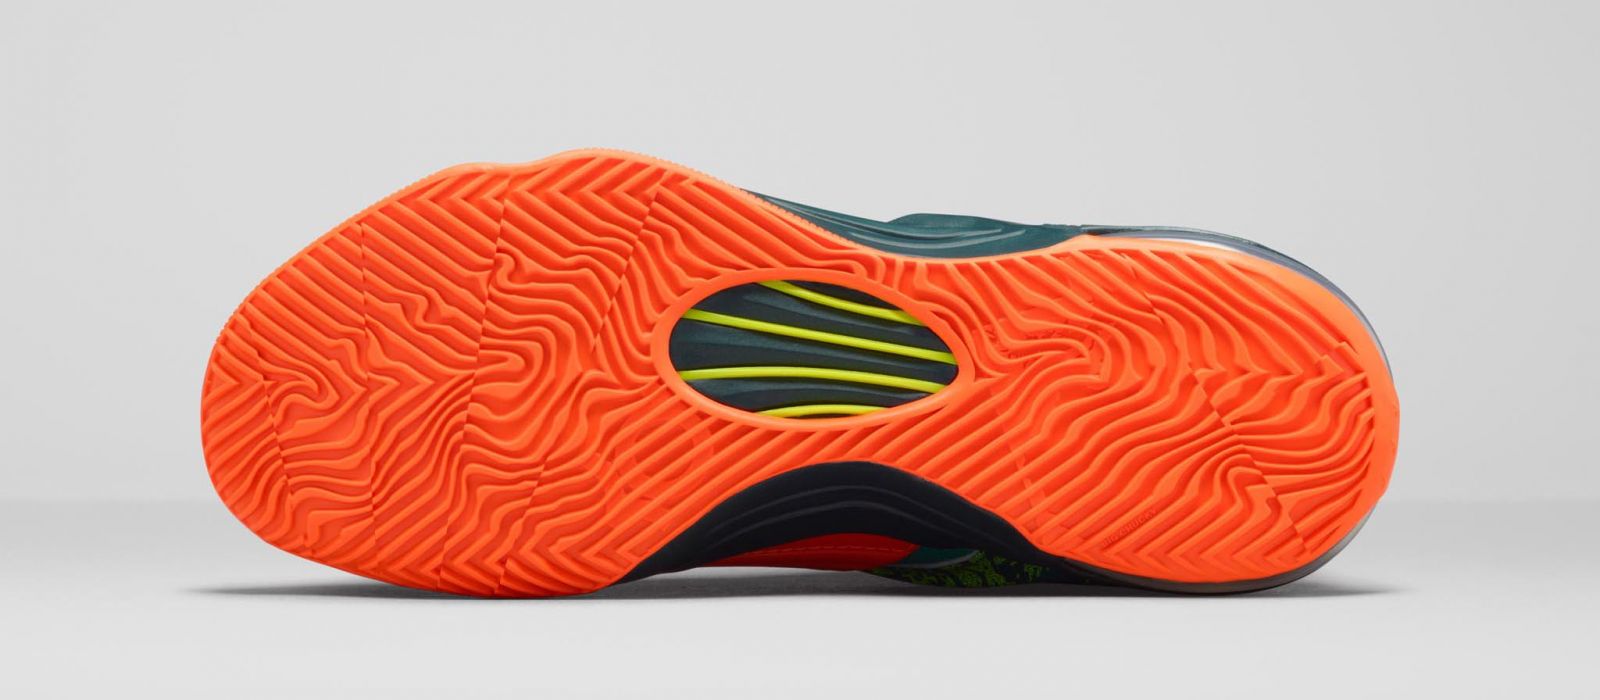 How to Buy the Nike KD 7 'Weatherman' on Nikestore | Sole Collector